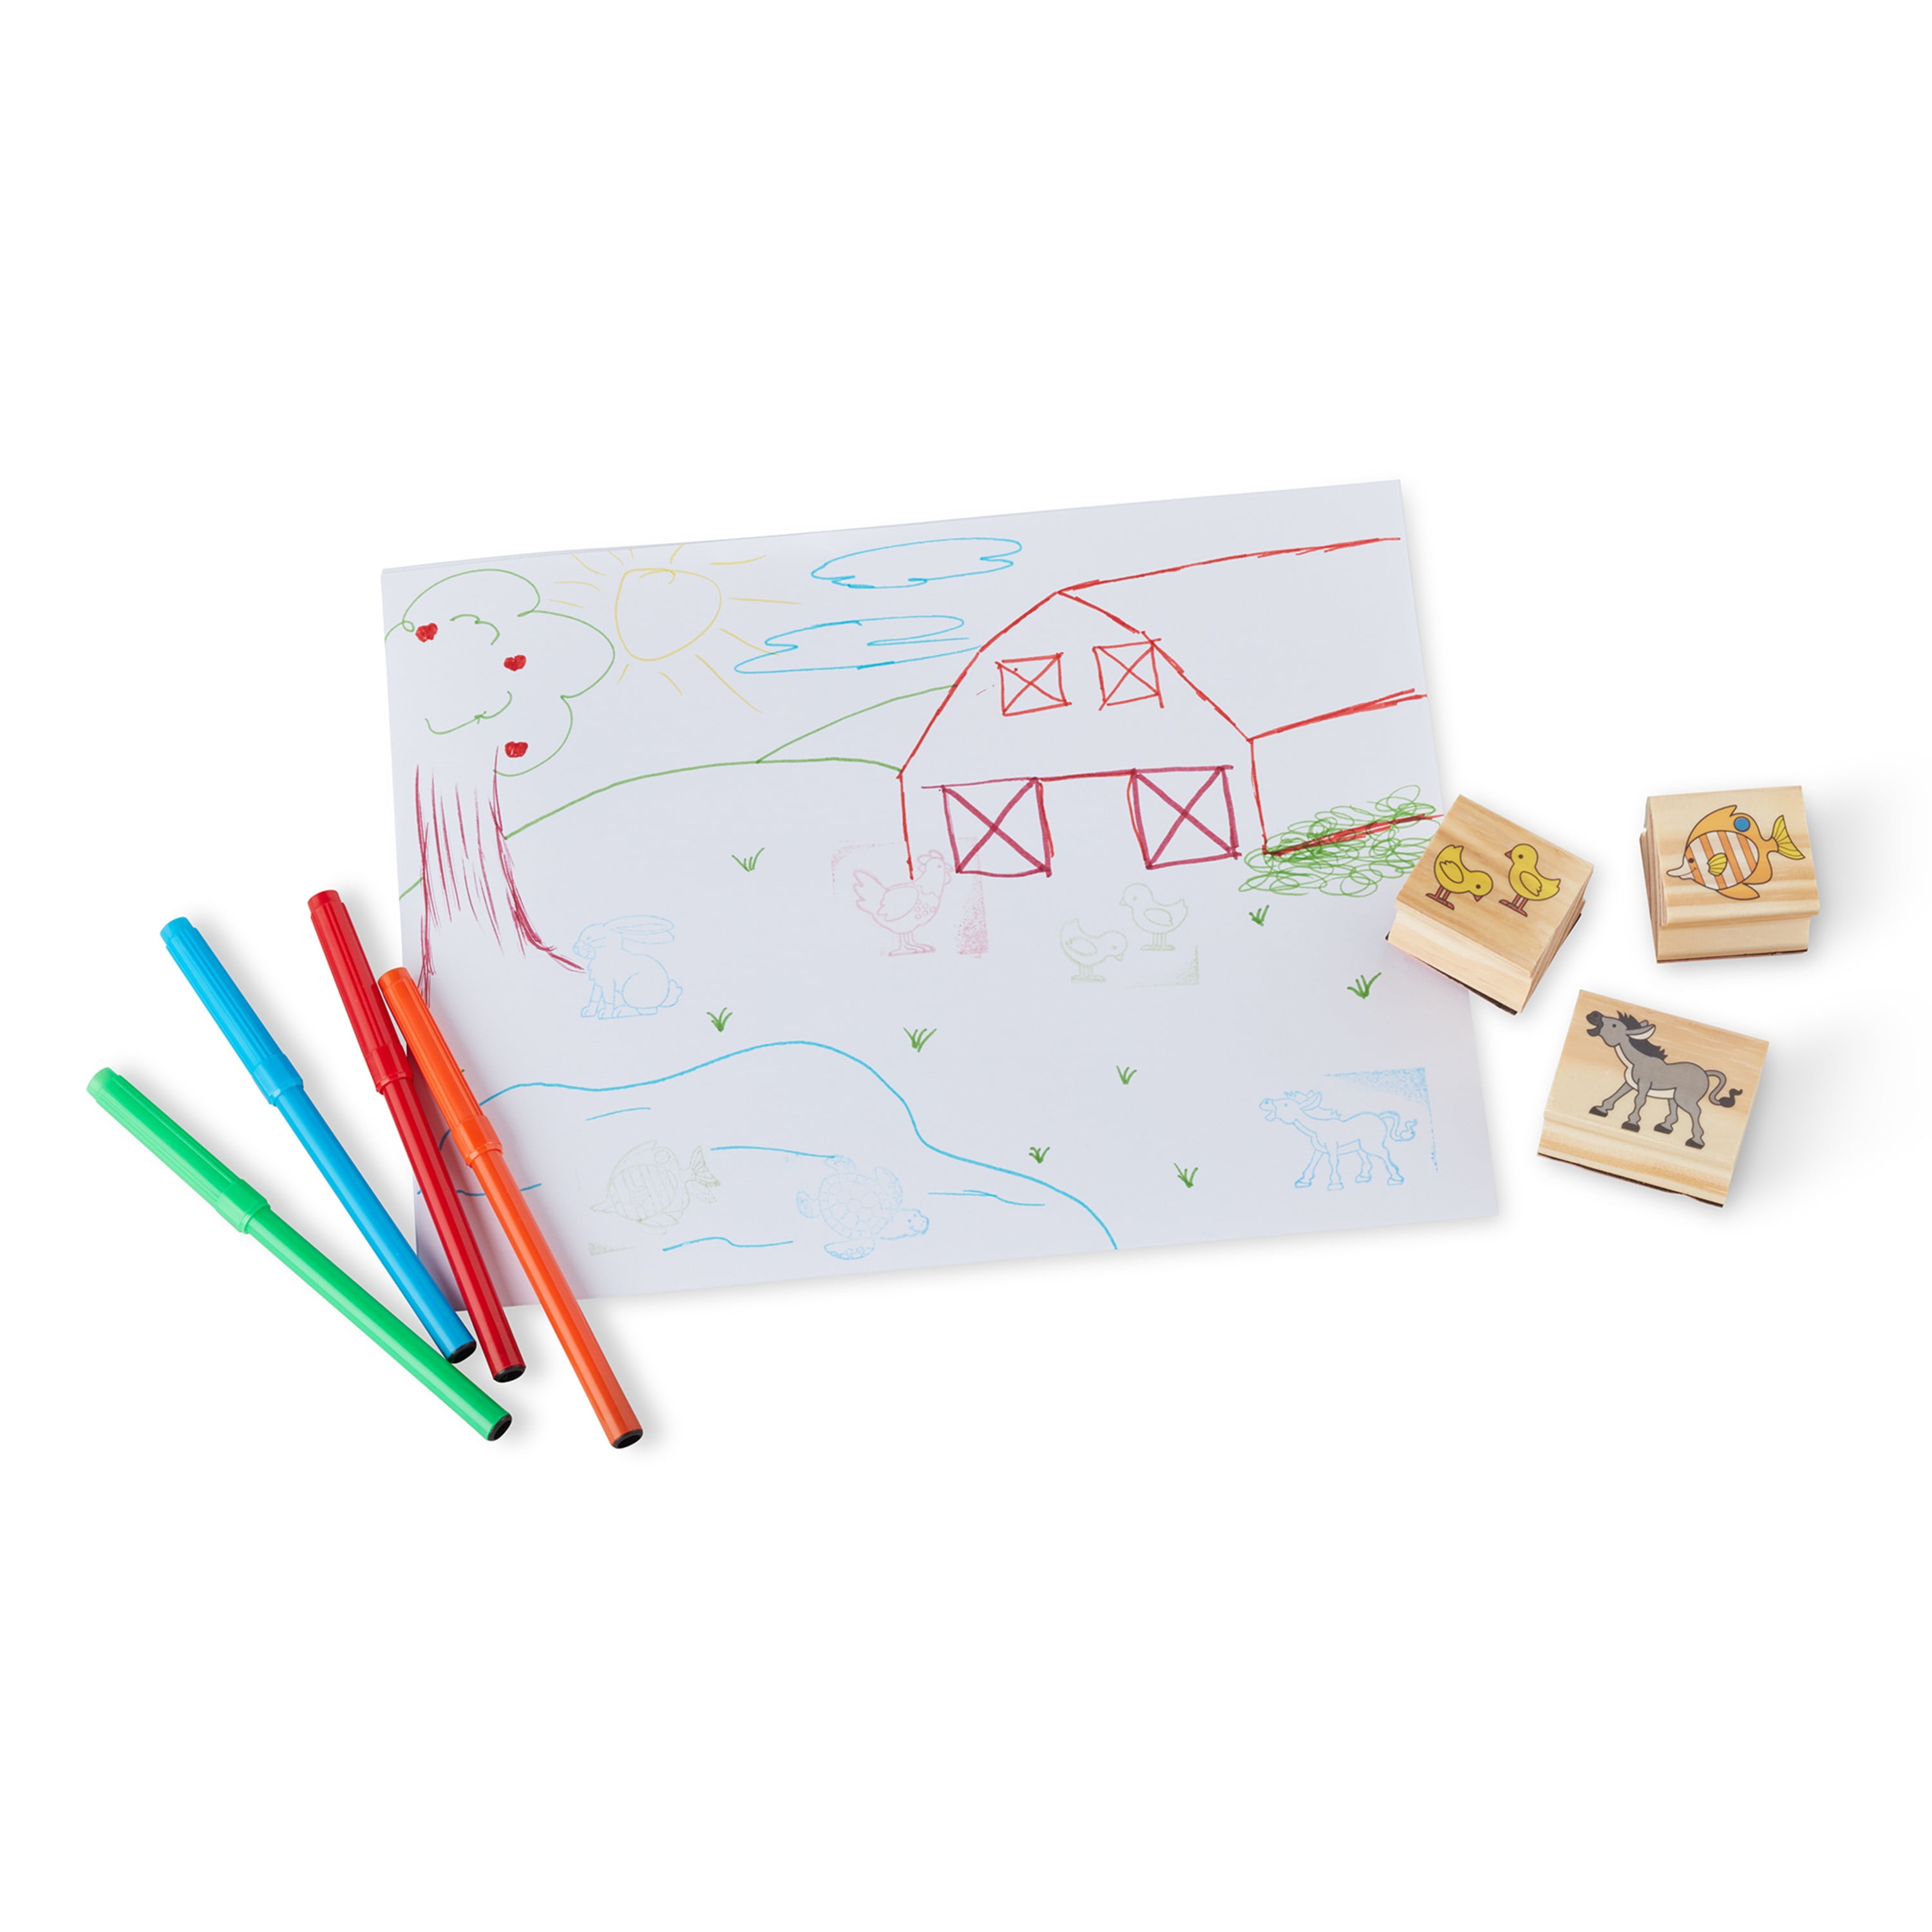 Melissa & Doug Farm & Pets Wooden Stamp Set with 2 Color Stamp Pad and 5  Markers